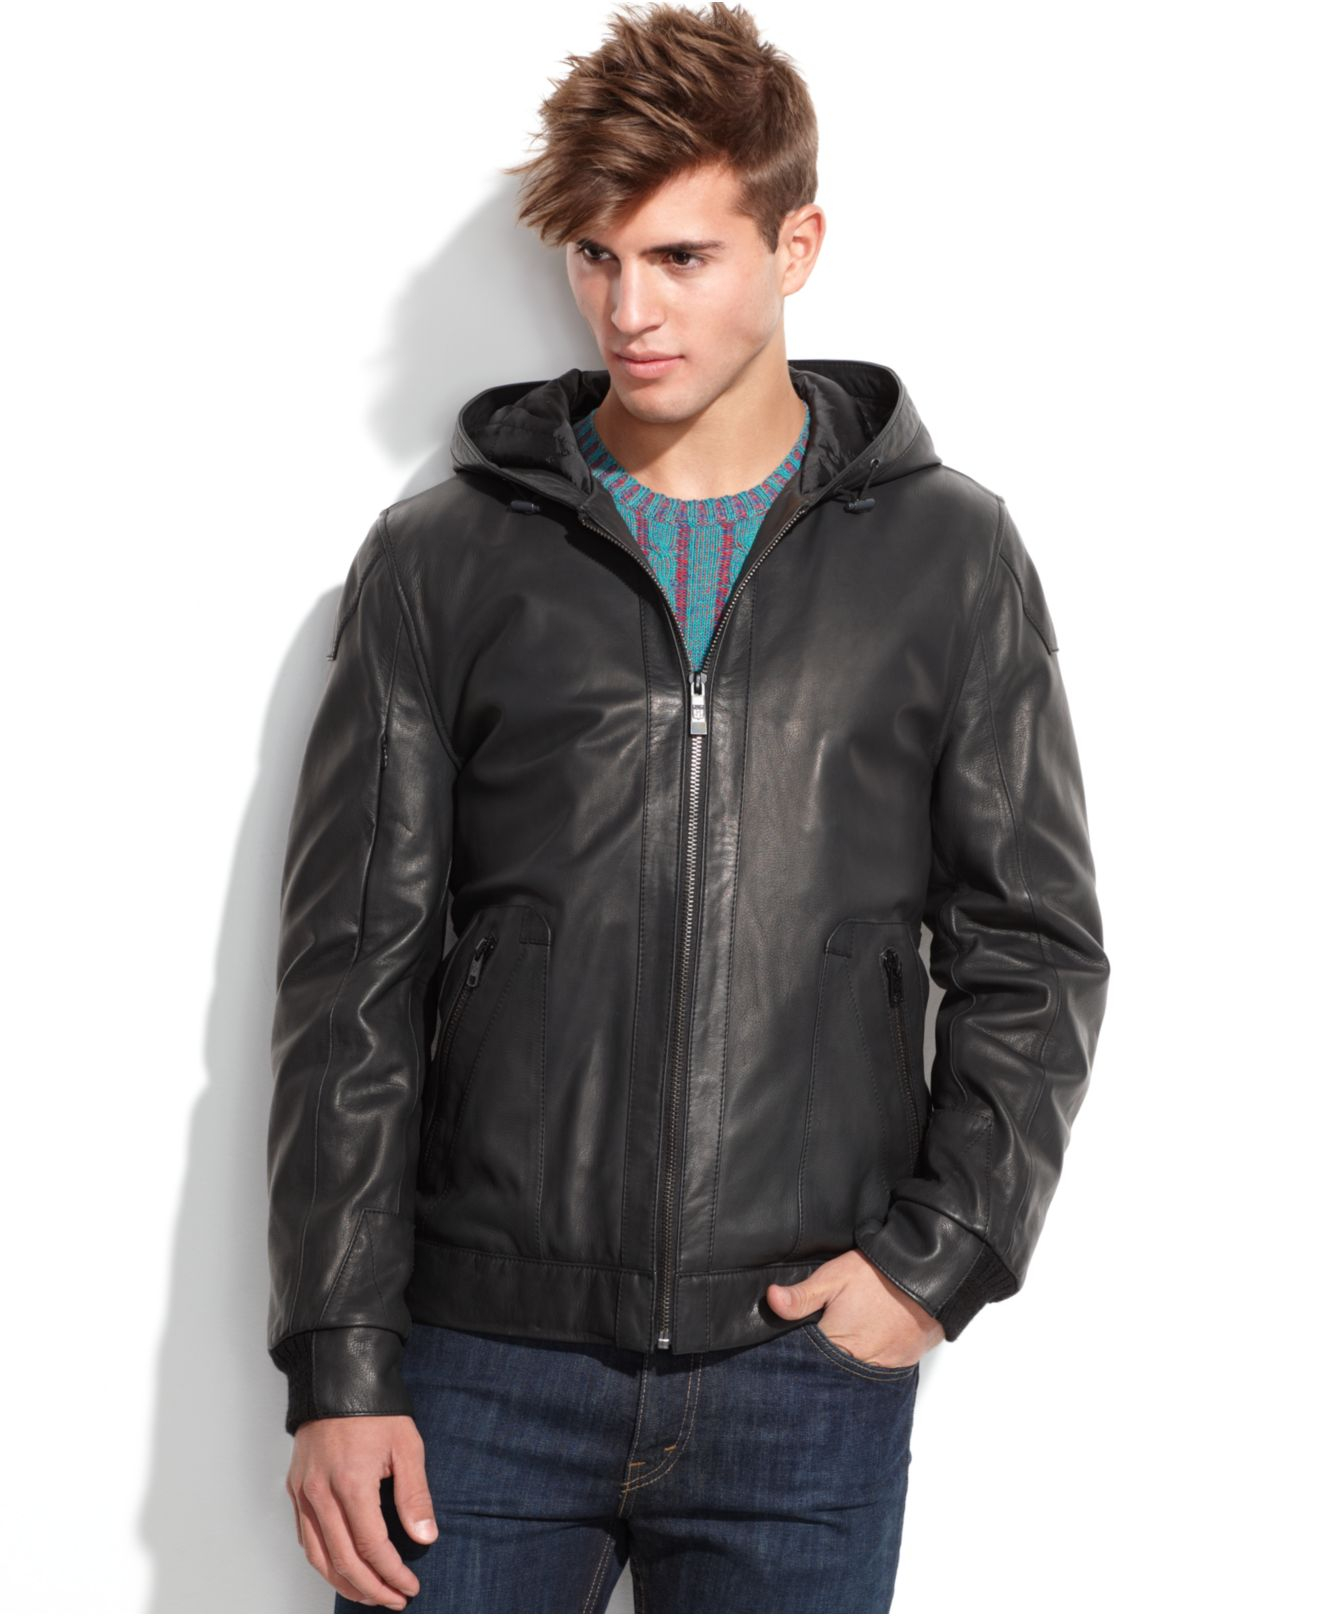 Lyst - Vince Camuto Hooded Washed Goat Leather Jacket in Gray for Men